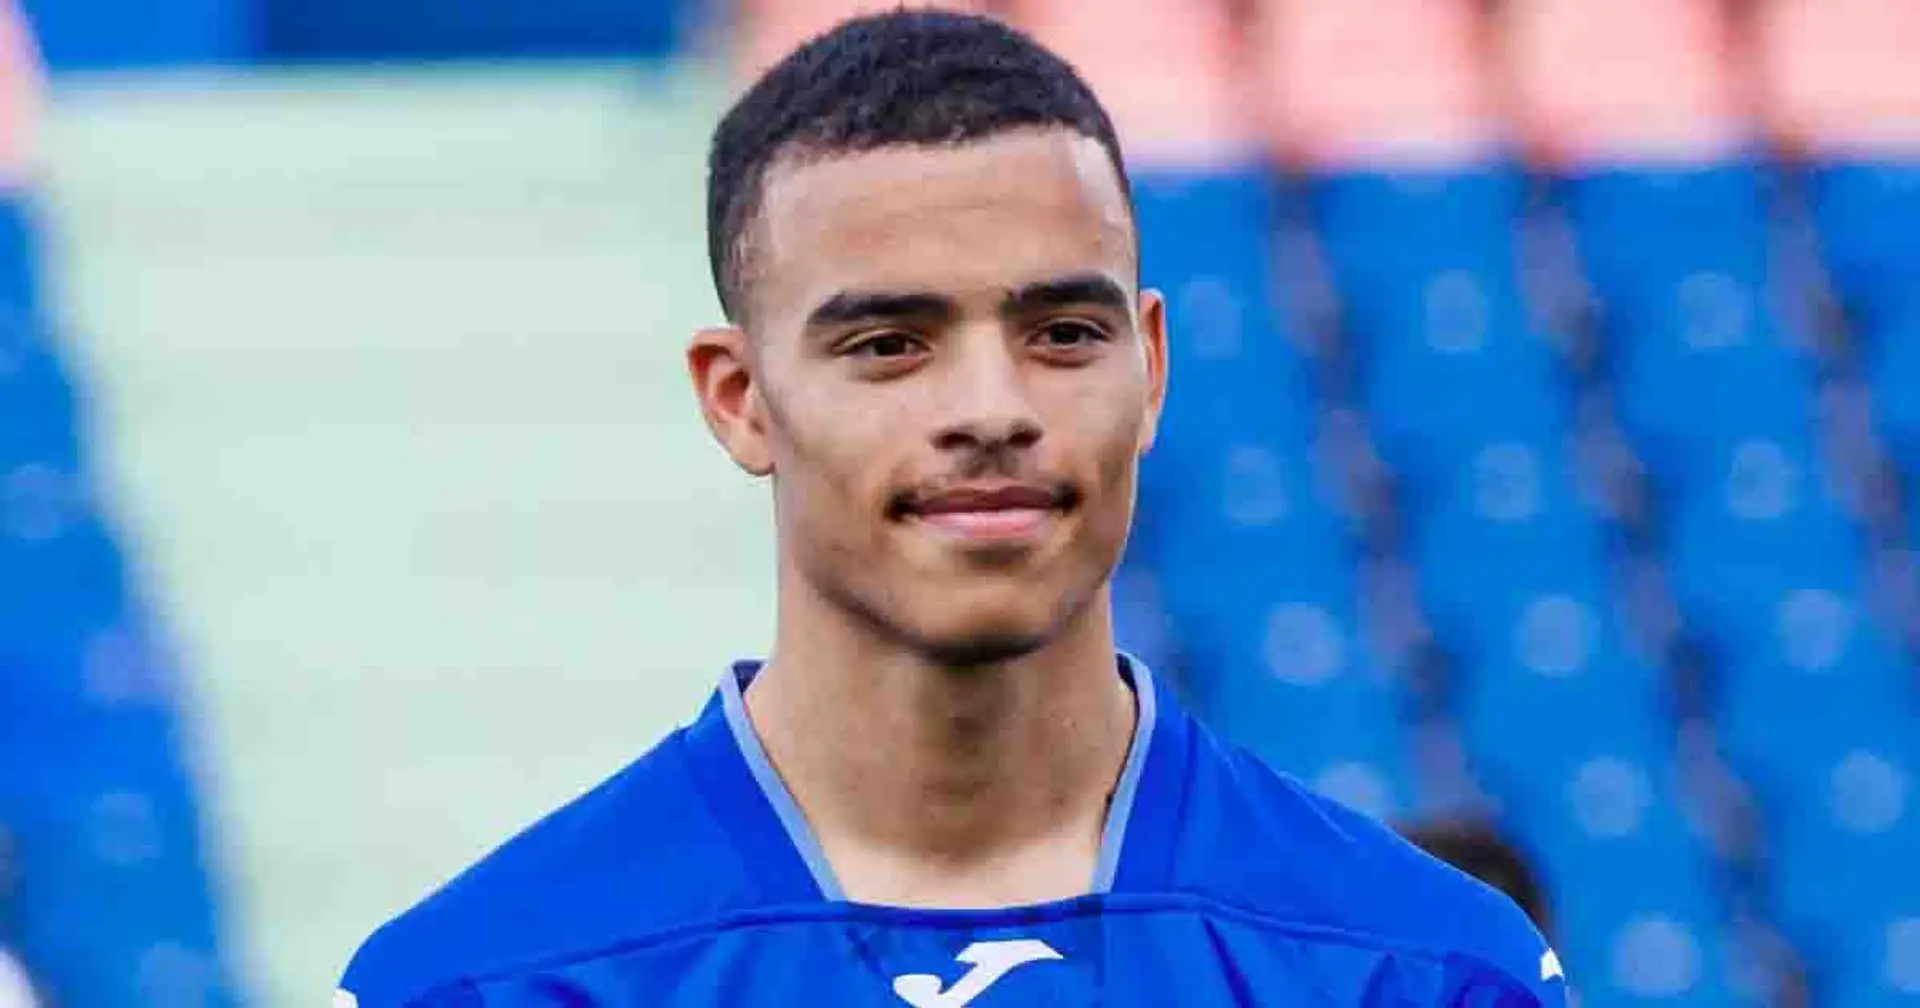 Revealed: what Getafe coaches think about Greenwood after first week of training